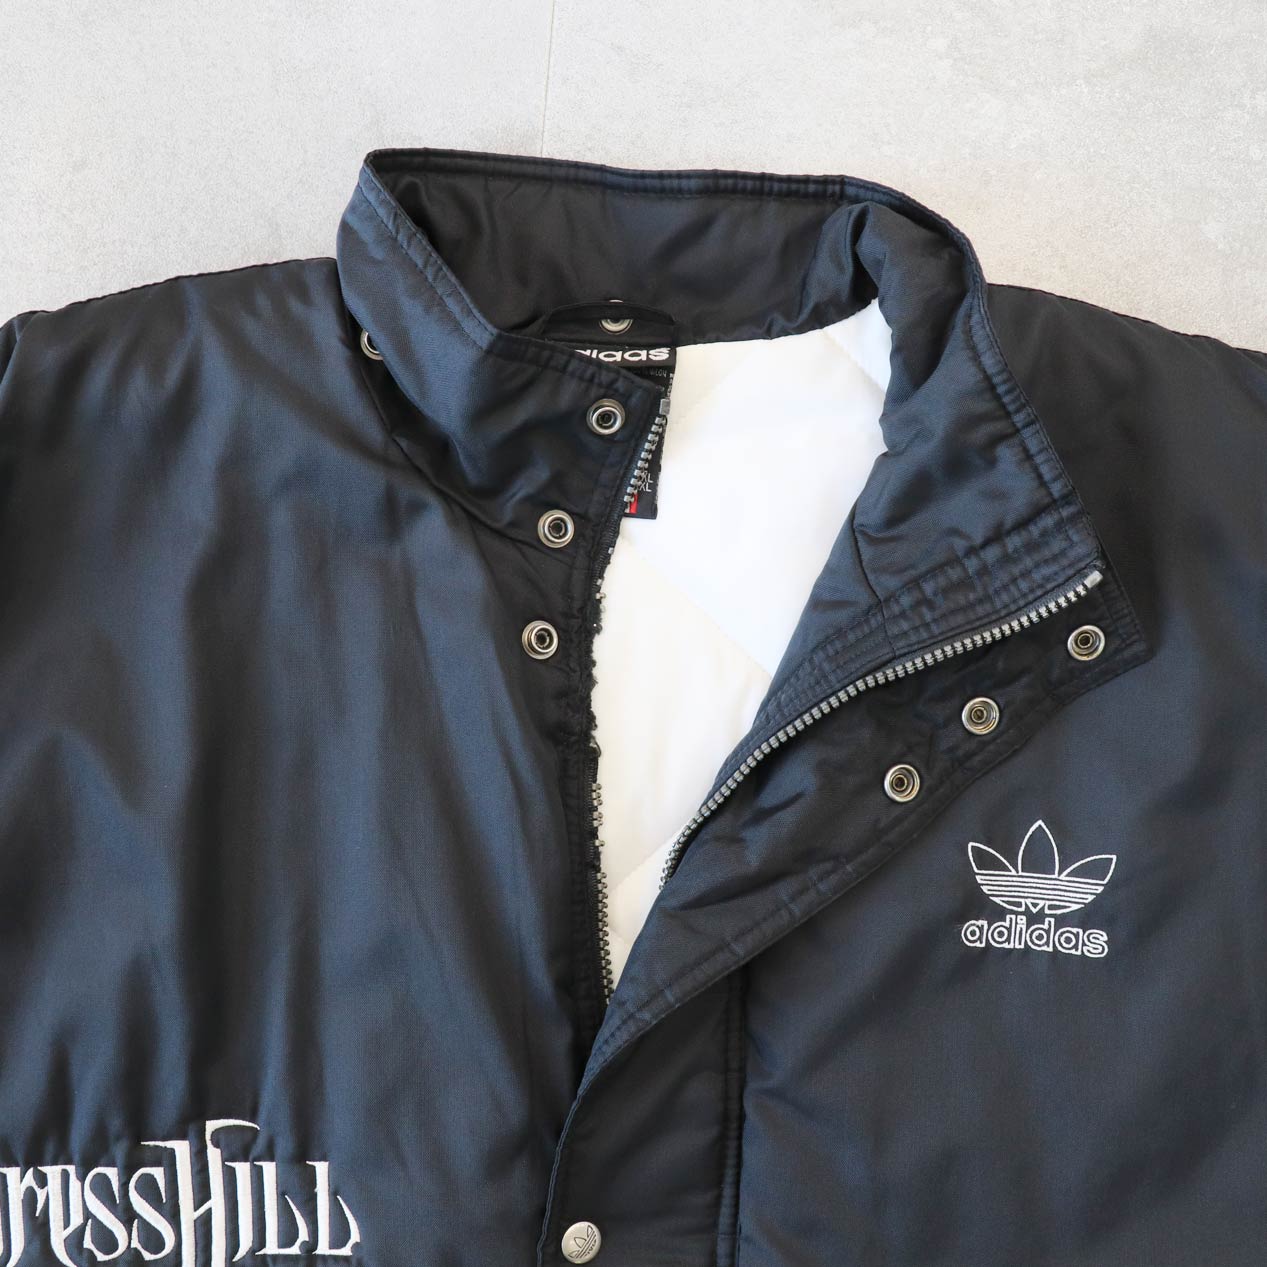 POST JUNK / 90's ADIDAS “CYPRESS HILL” Embroidered Padded Jacket [XXL]